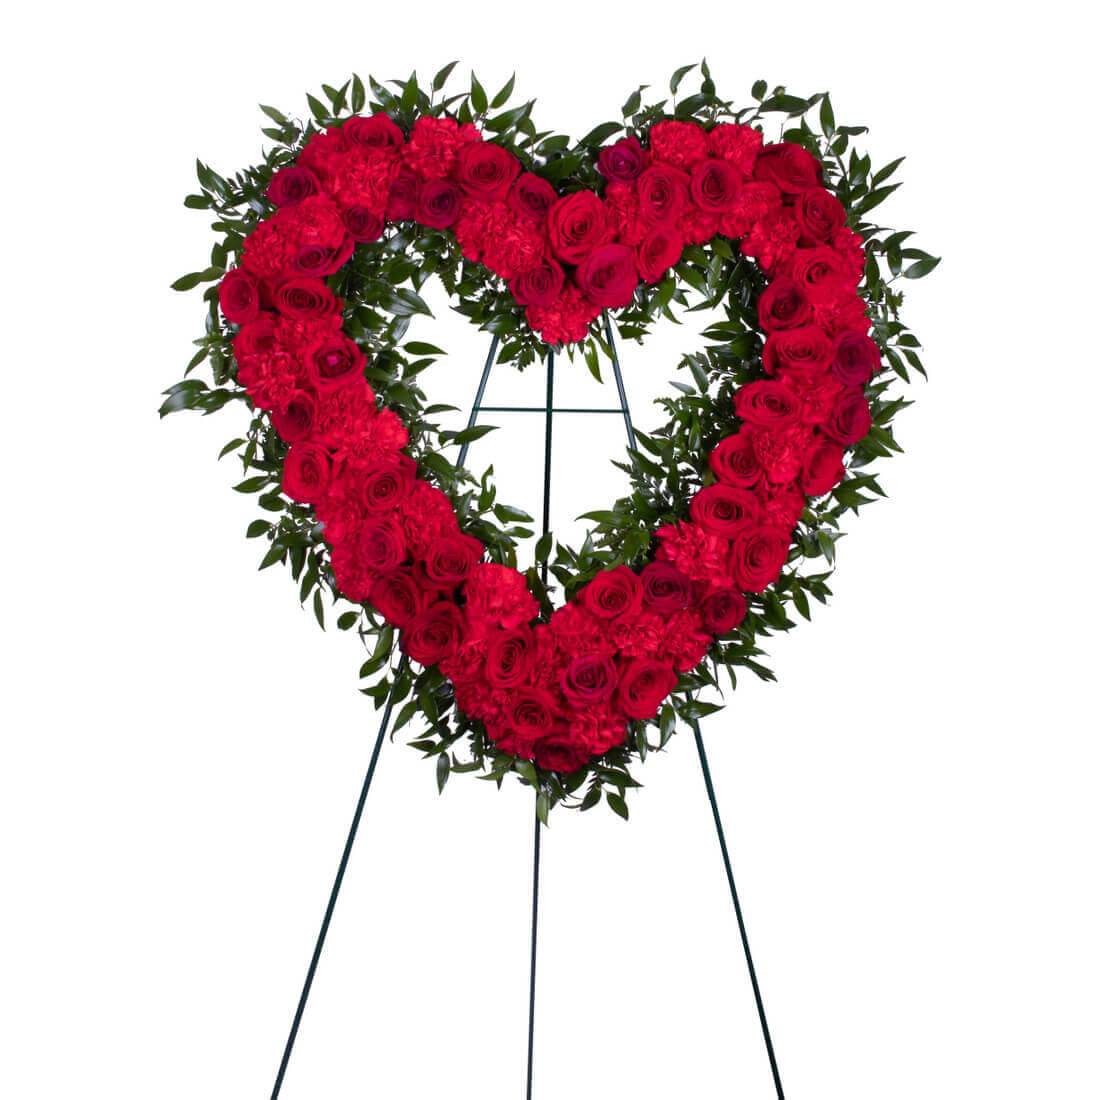 Blessings in Red Open Heart Funeral Wreath